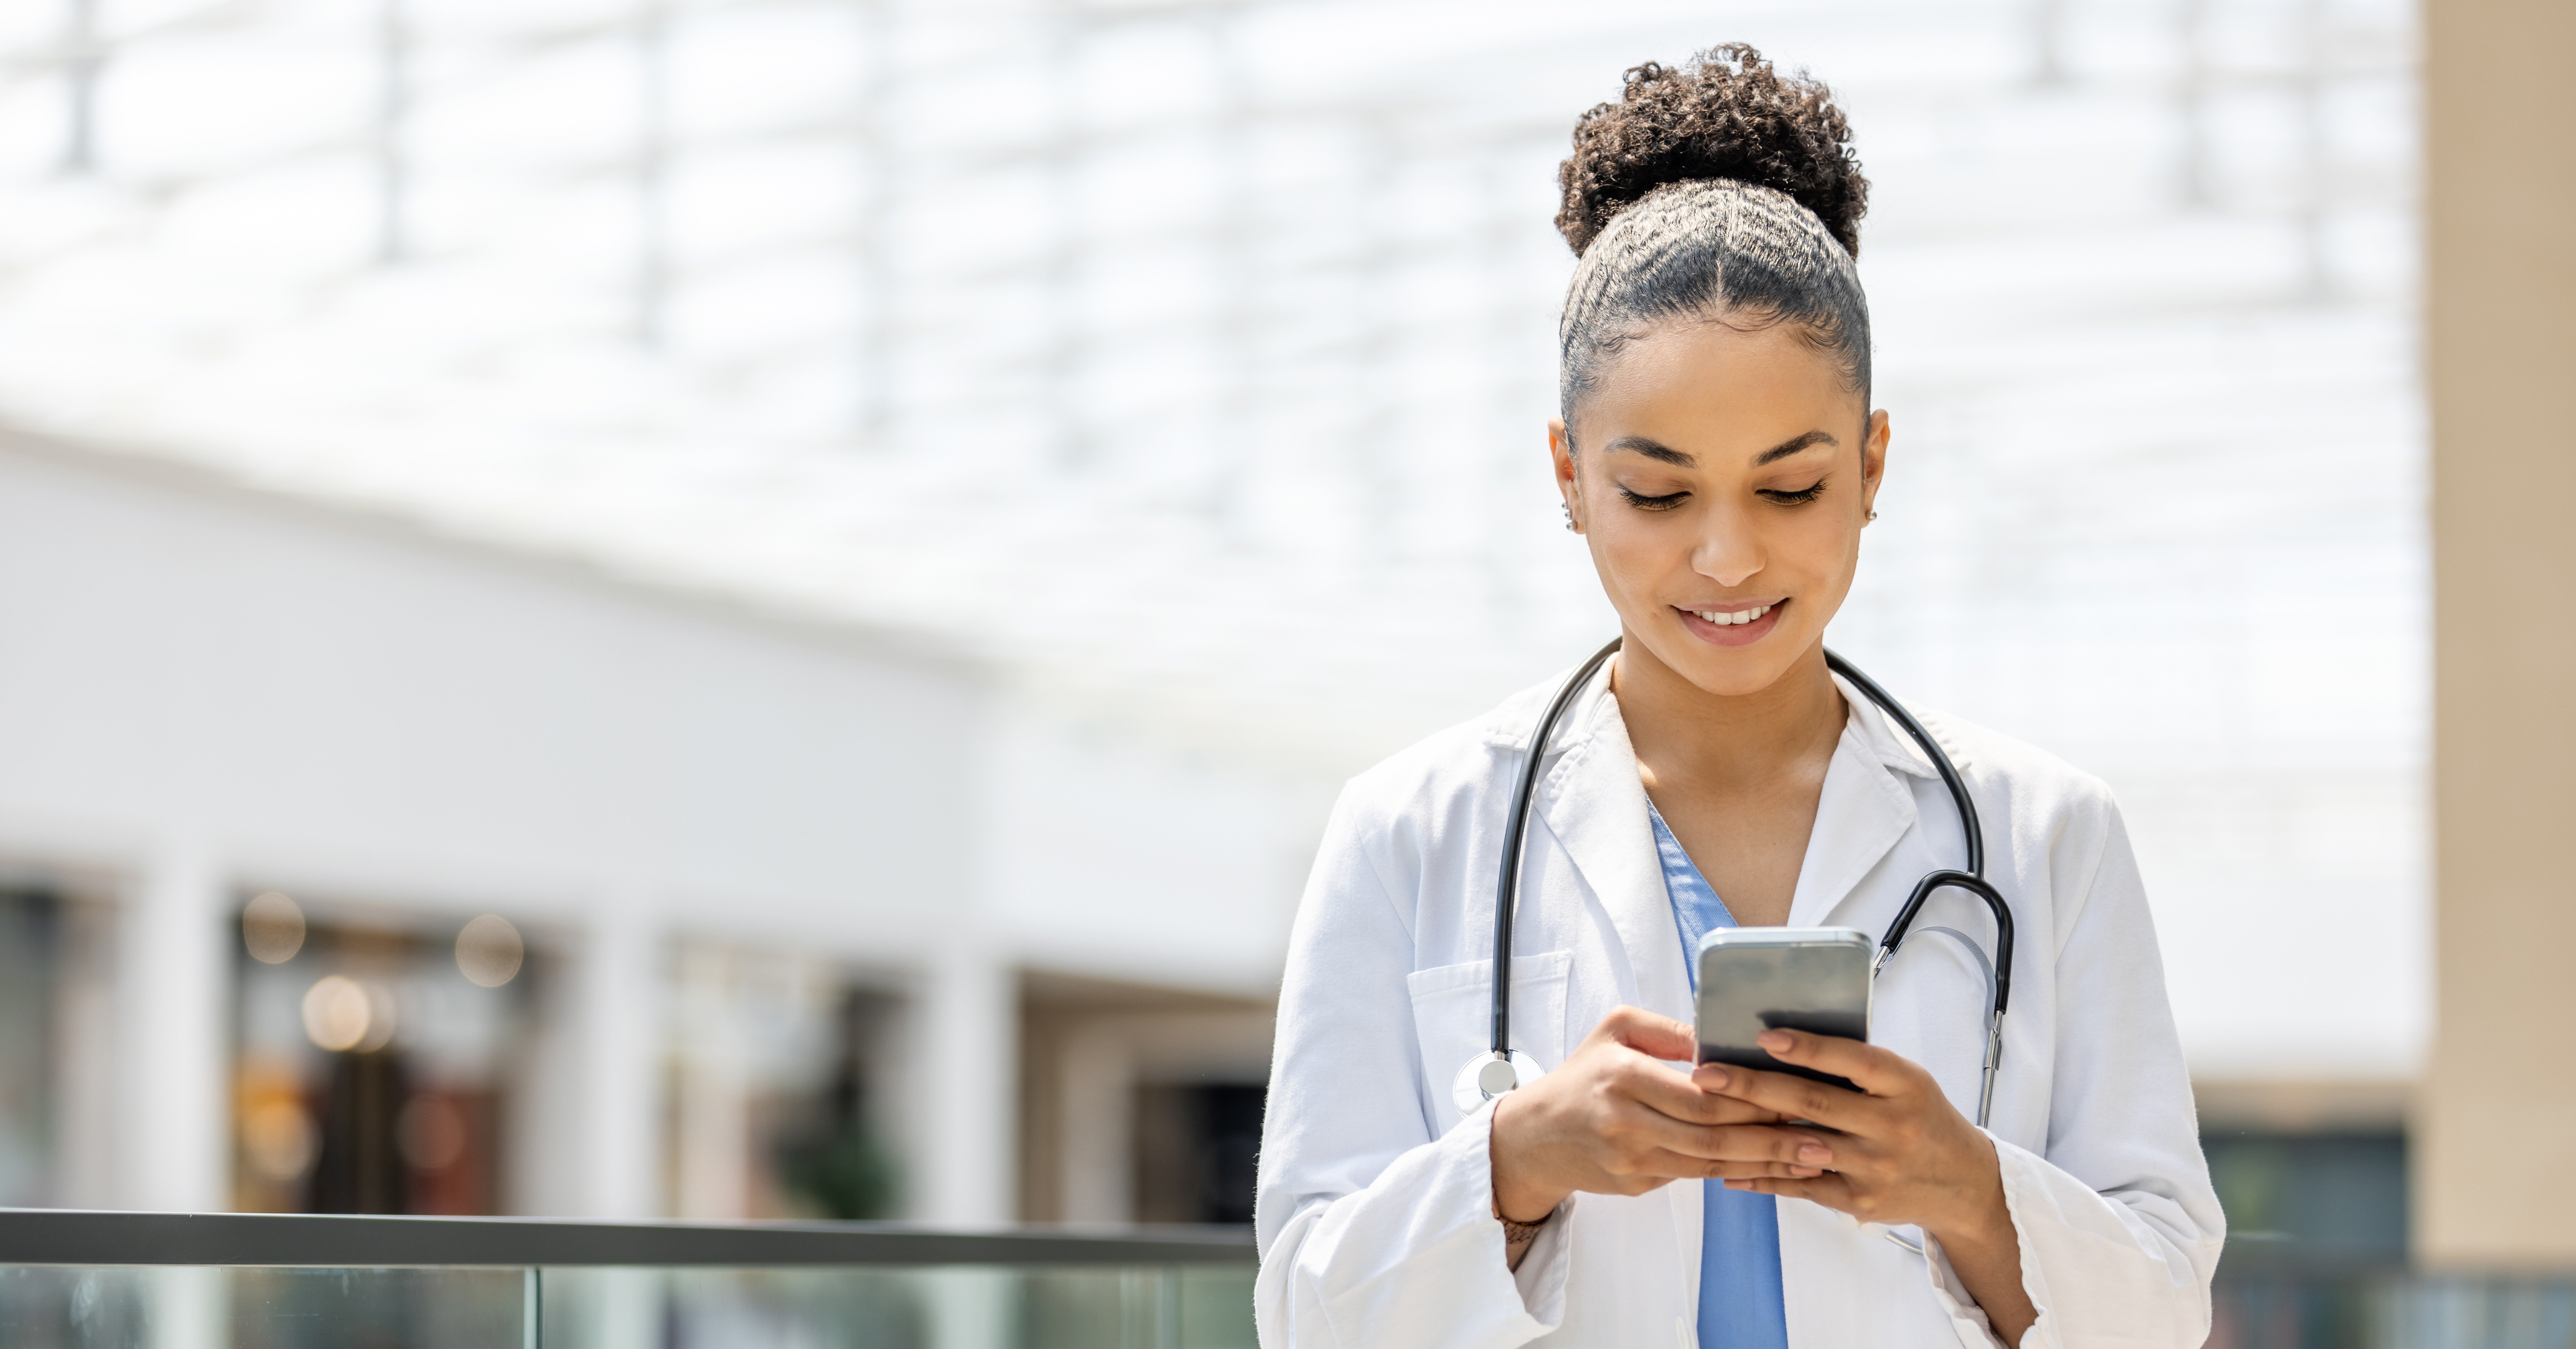 Young physician looks down at her phone smiling 